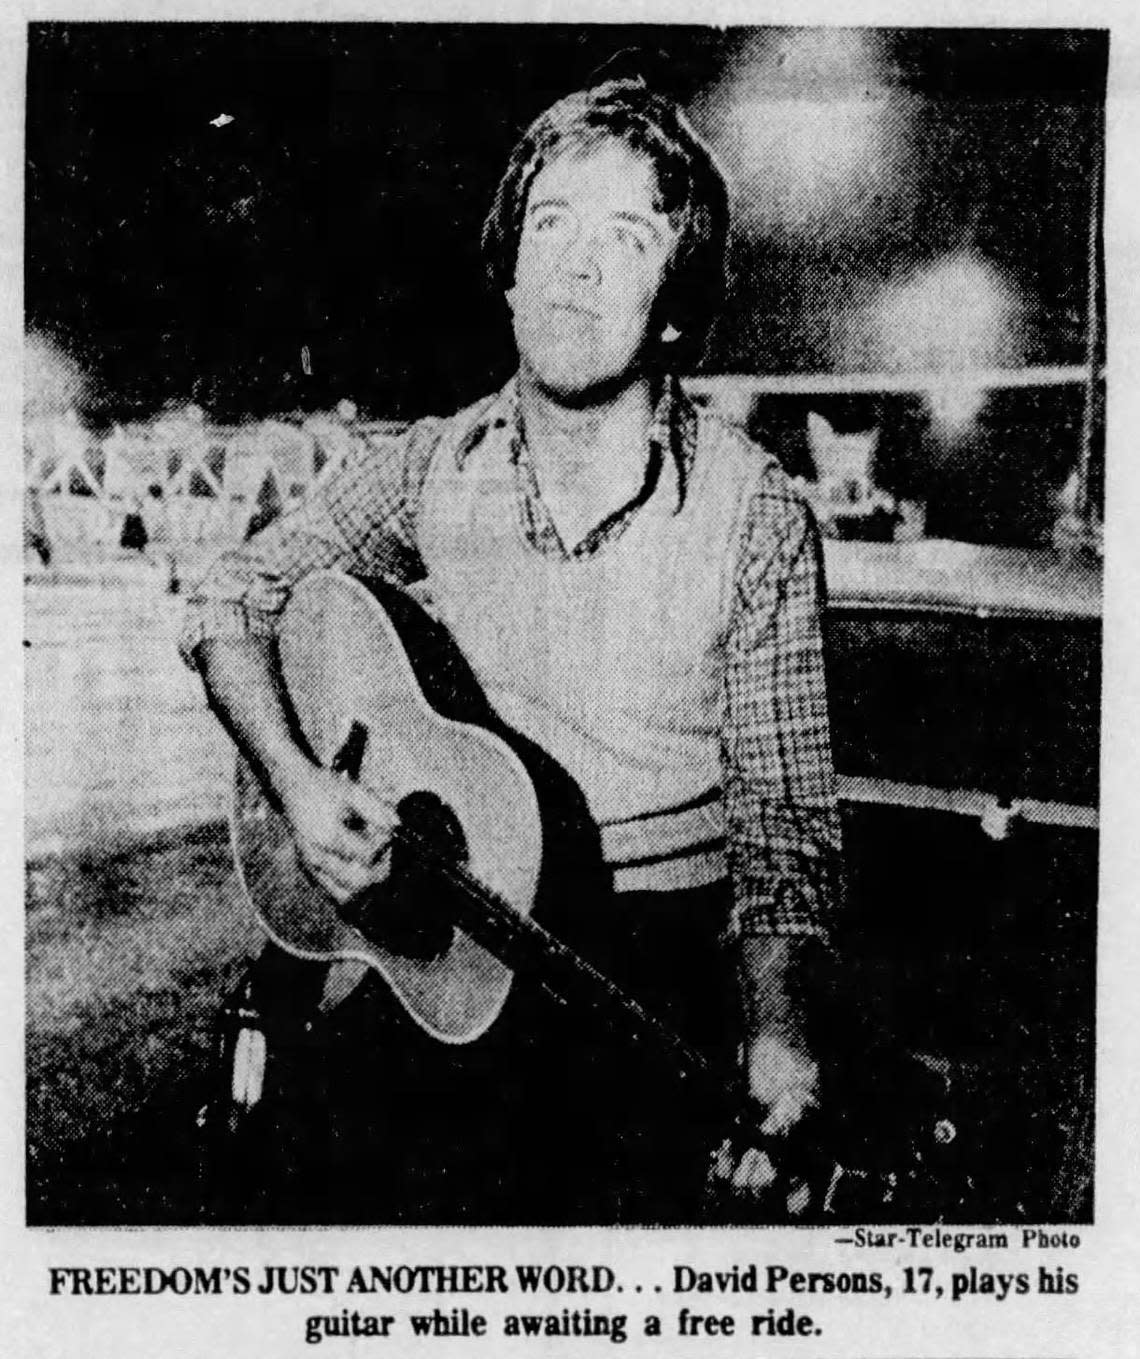 David Persons, 17, arrived at 4 a.m. so he could be the first driver on Interstate 30 when the Dallas-Fort Worth Turnpike officially changed to a free expressway on Jan. 1, 1978.